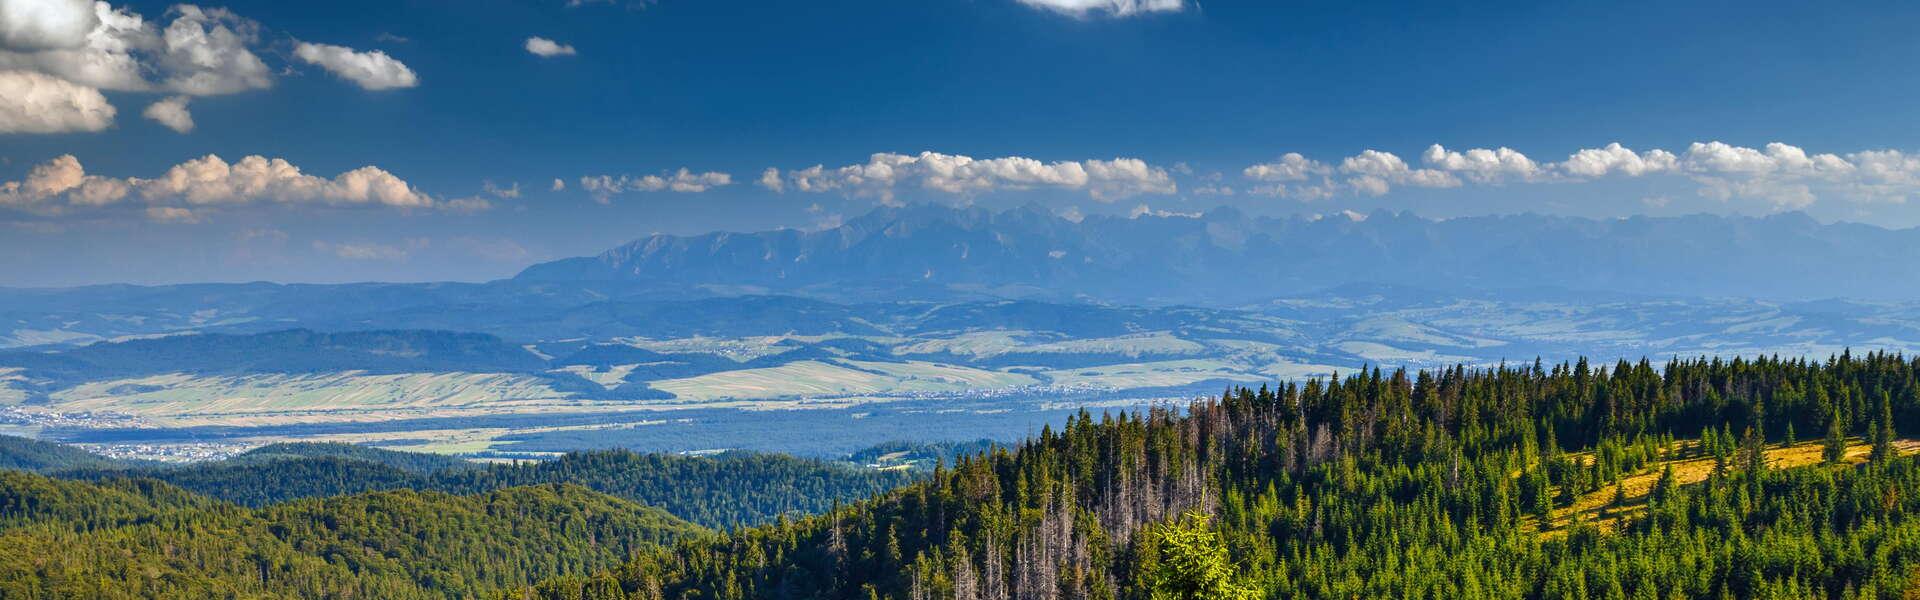 A view of the Gorce Mountains, a view of the Tatra Mountains in the background. Around forests and meadows